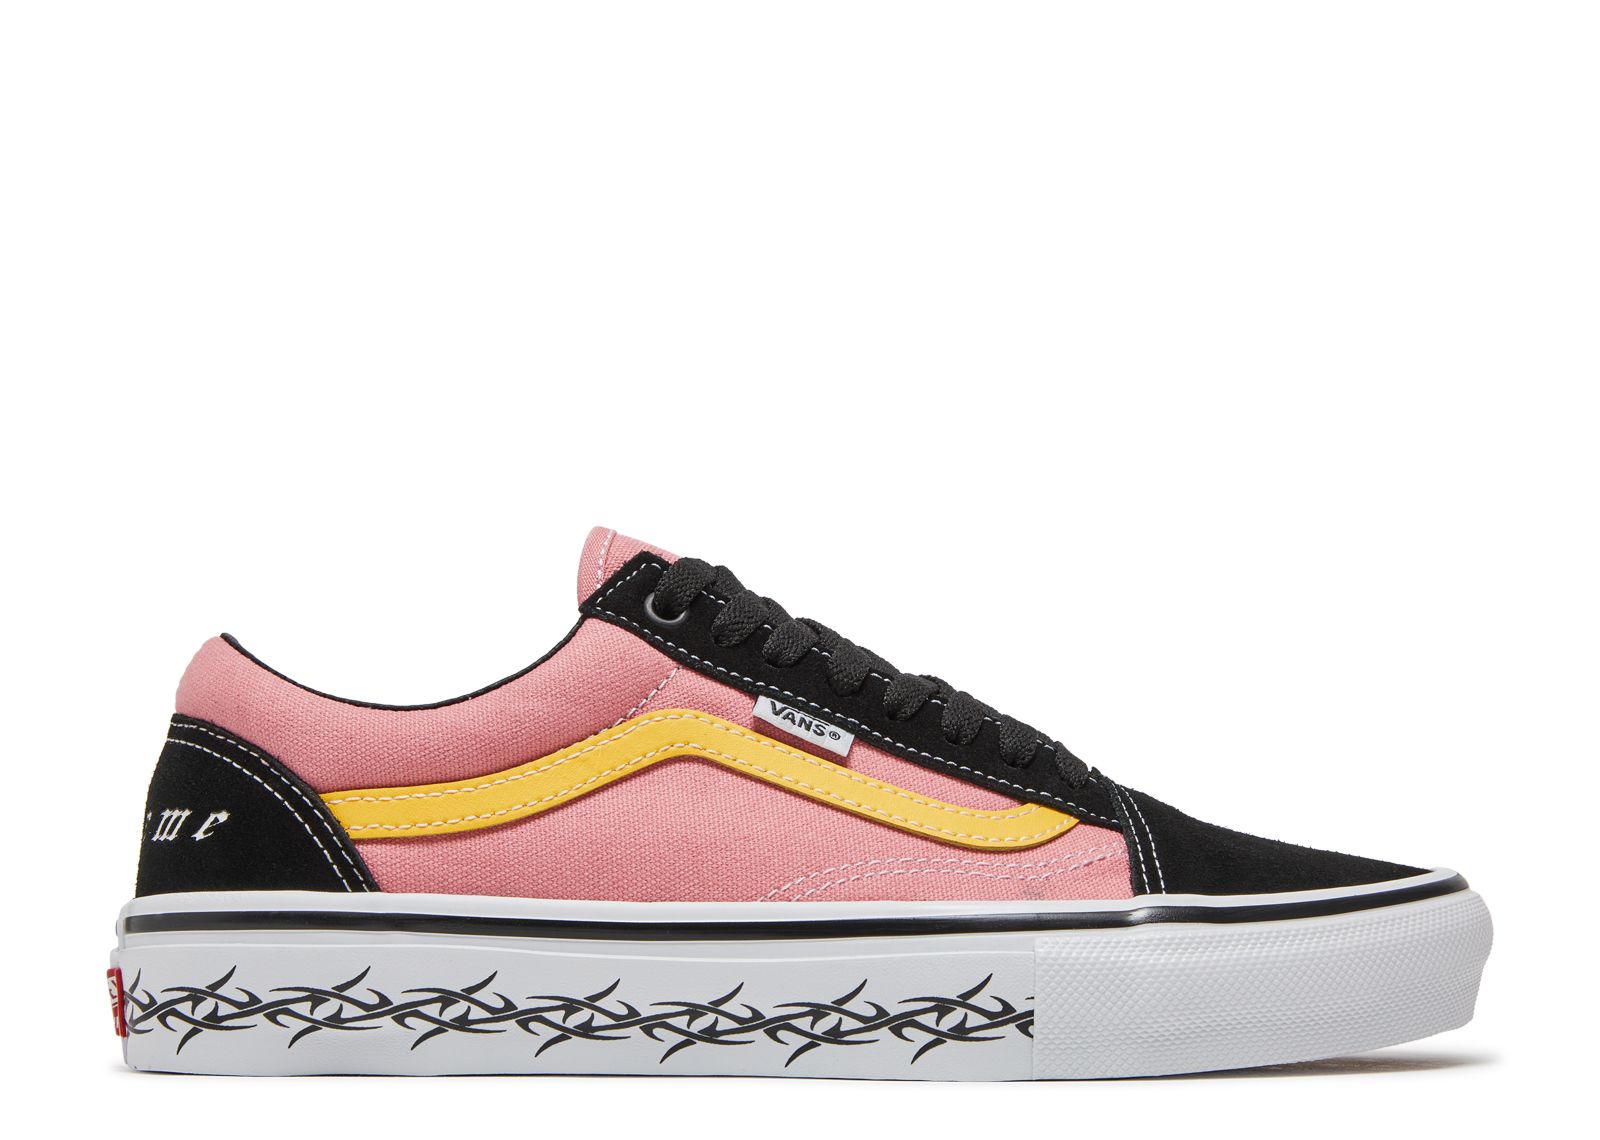 Кроссовки Vans Supreme X Old Skool 'Barbed Wire - Pink', розовый ce cog 4d barbed suture with l cannula 21g 100mm wire fact lift hilos tensores hskinlift pdo molding fishbone mono thread